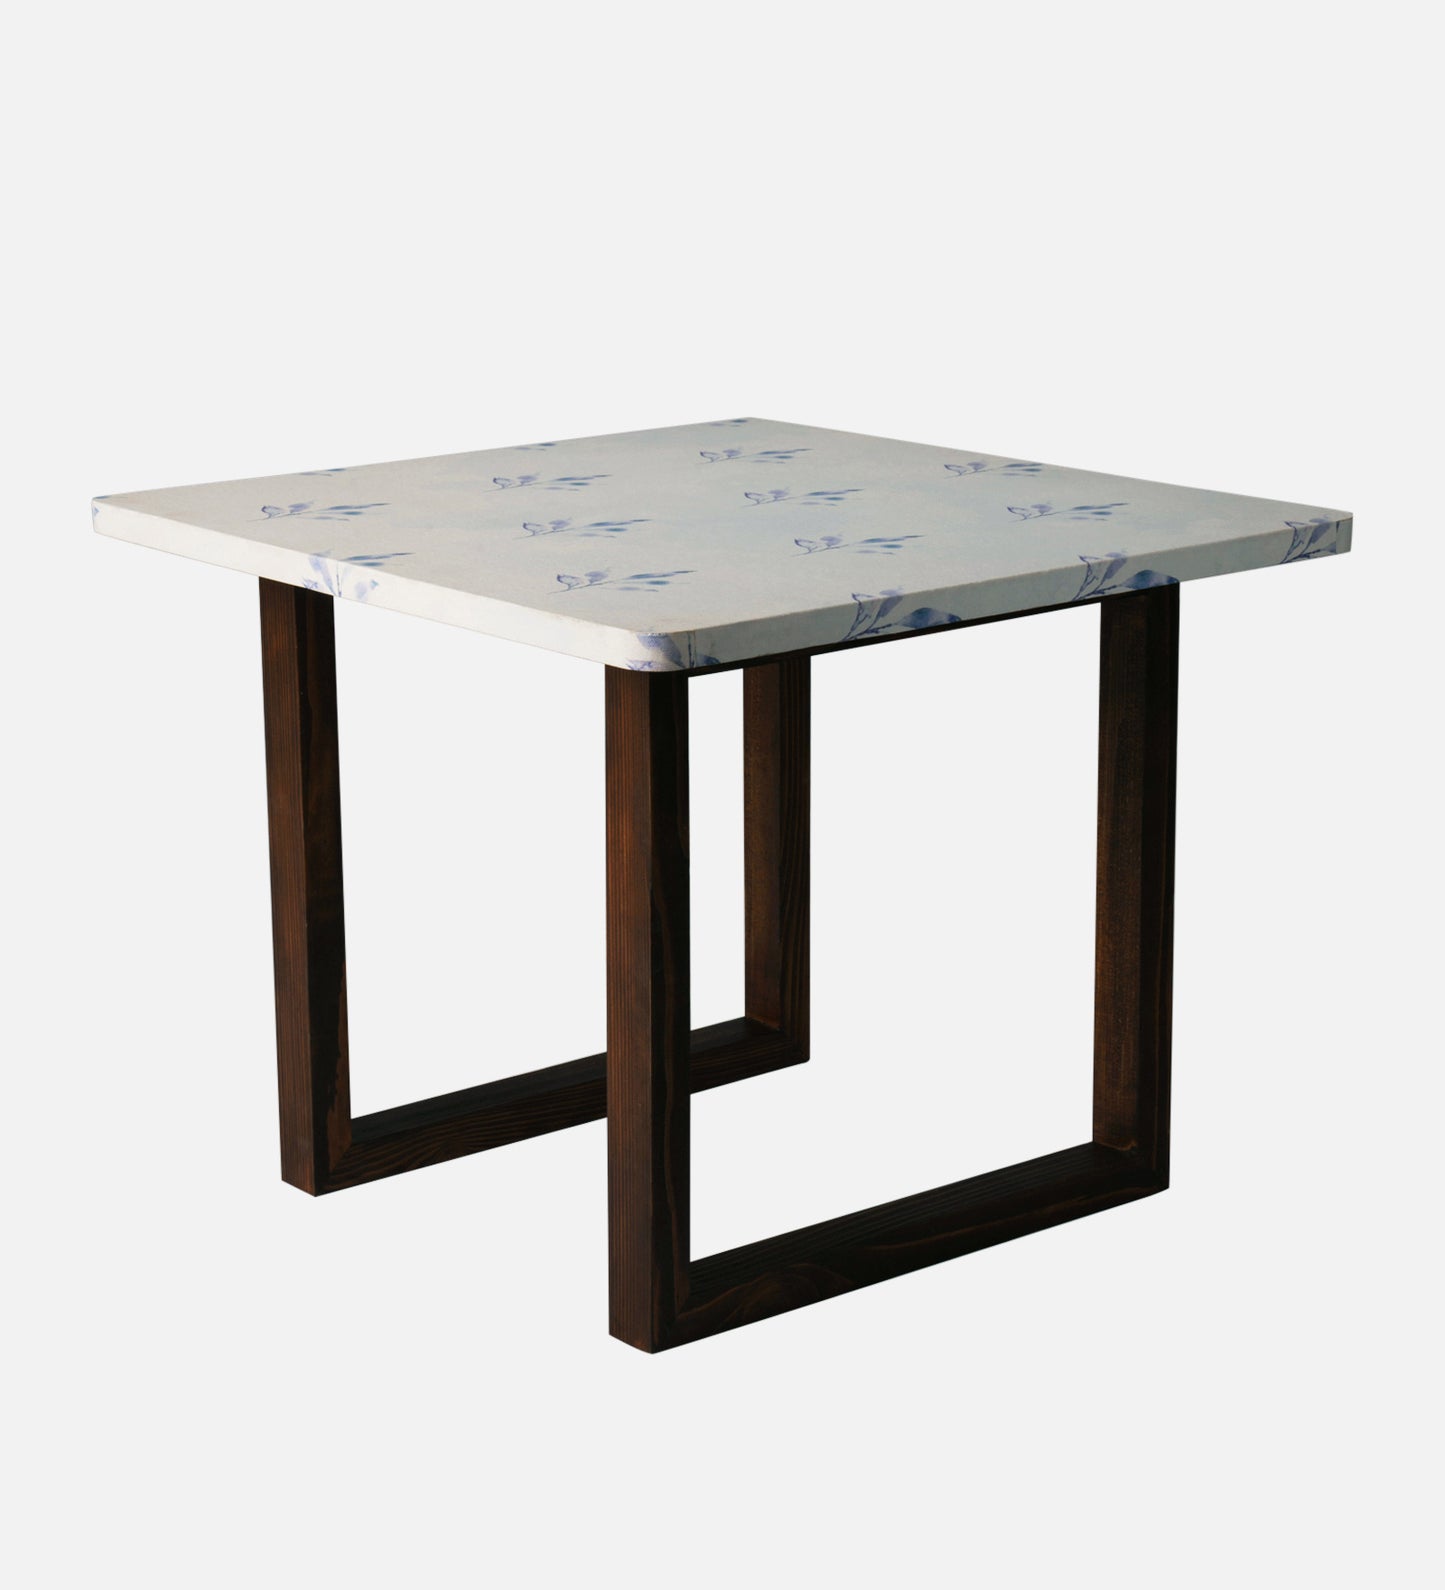 Tiny Twigs Square Coffee Tables, Wooden Tables, Coffee Tables, Center Tables, Living Room Decor by A Tiny Mistake